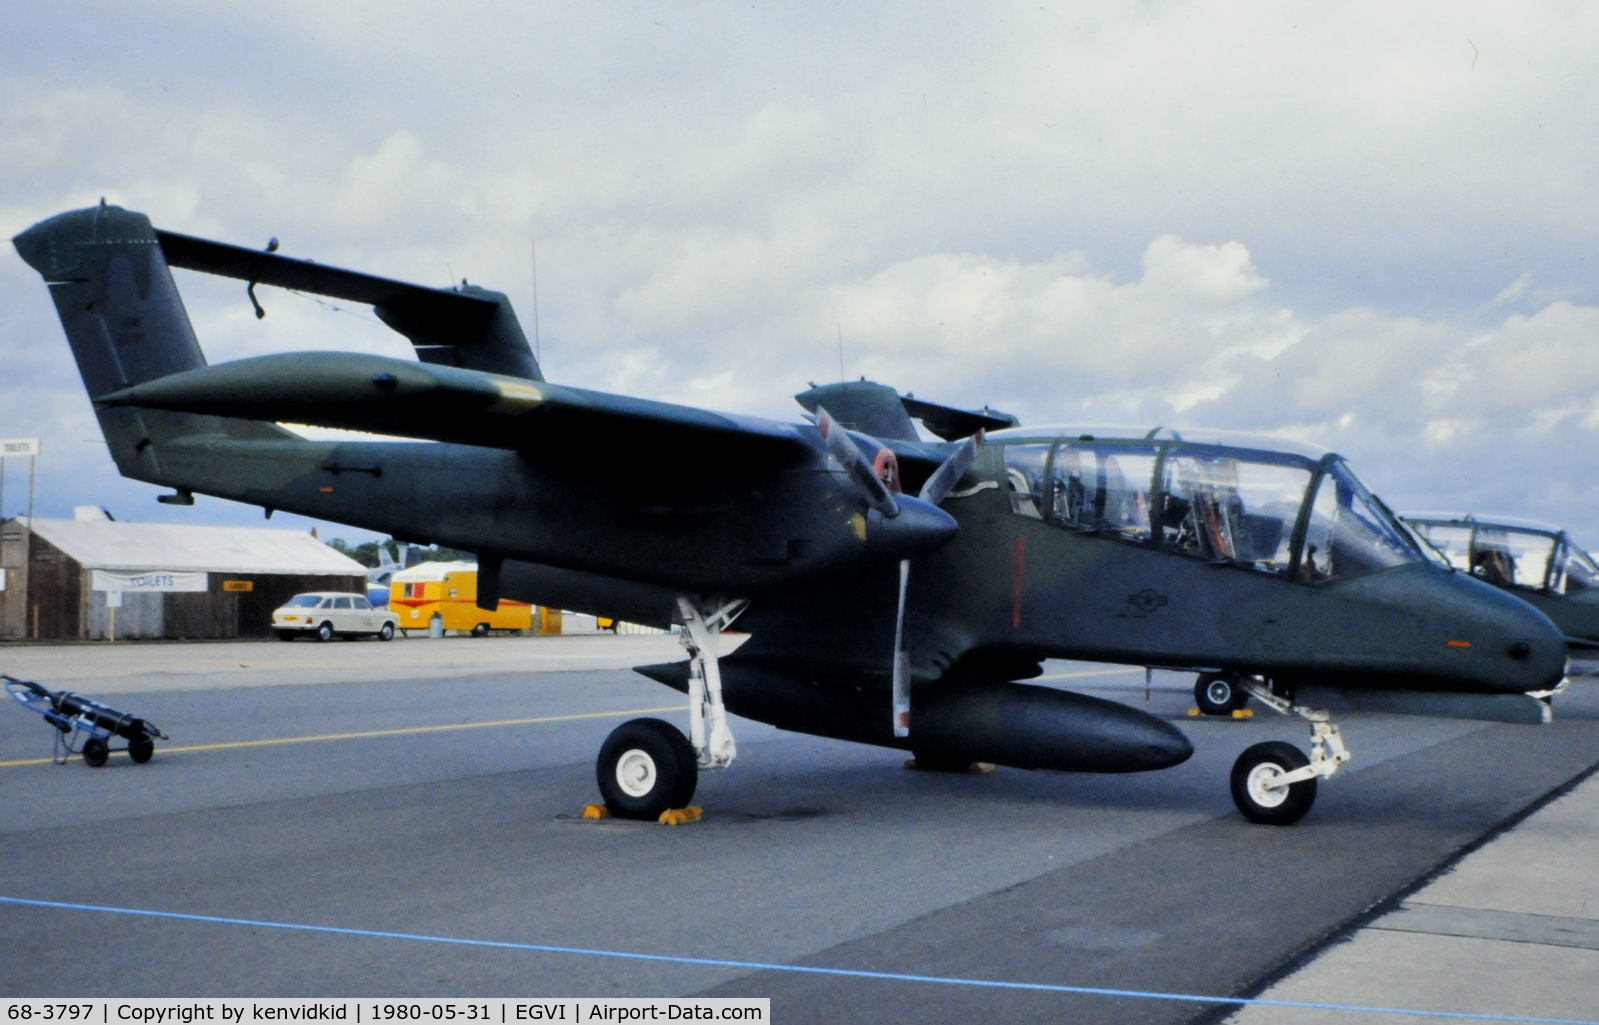 68-3797, 1967 North American Rockwell OV-10A Bronco C/N 321-123, At the 1980 International Air Tattoo Greenham Common, copied from slide.